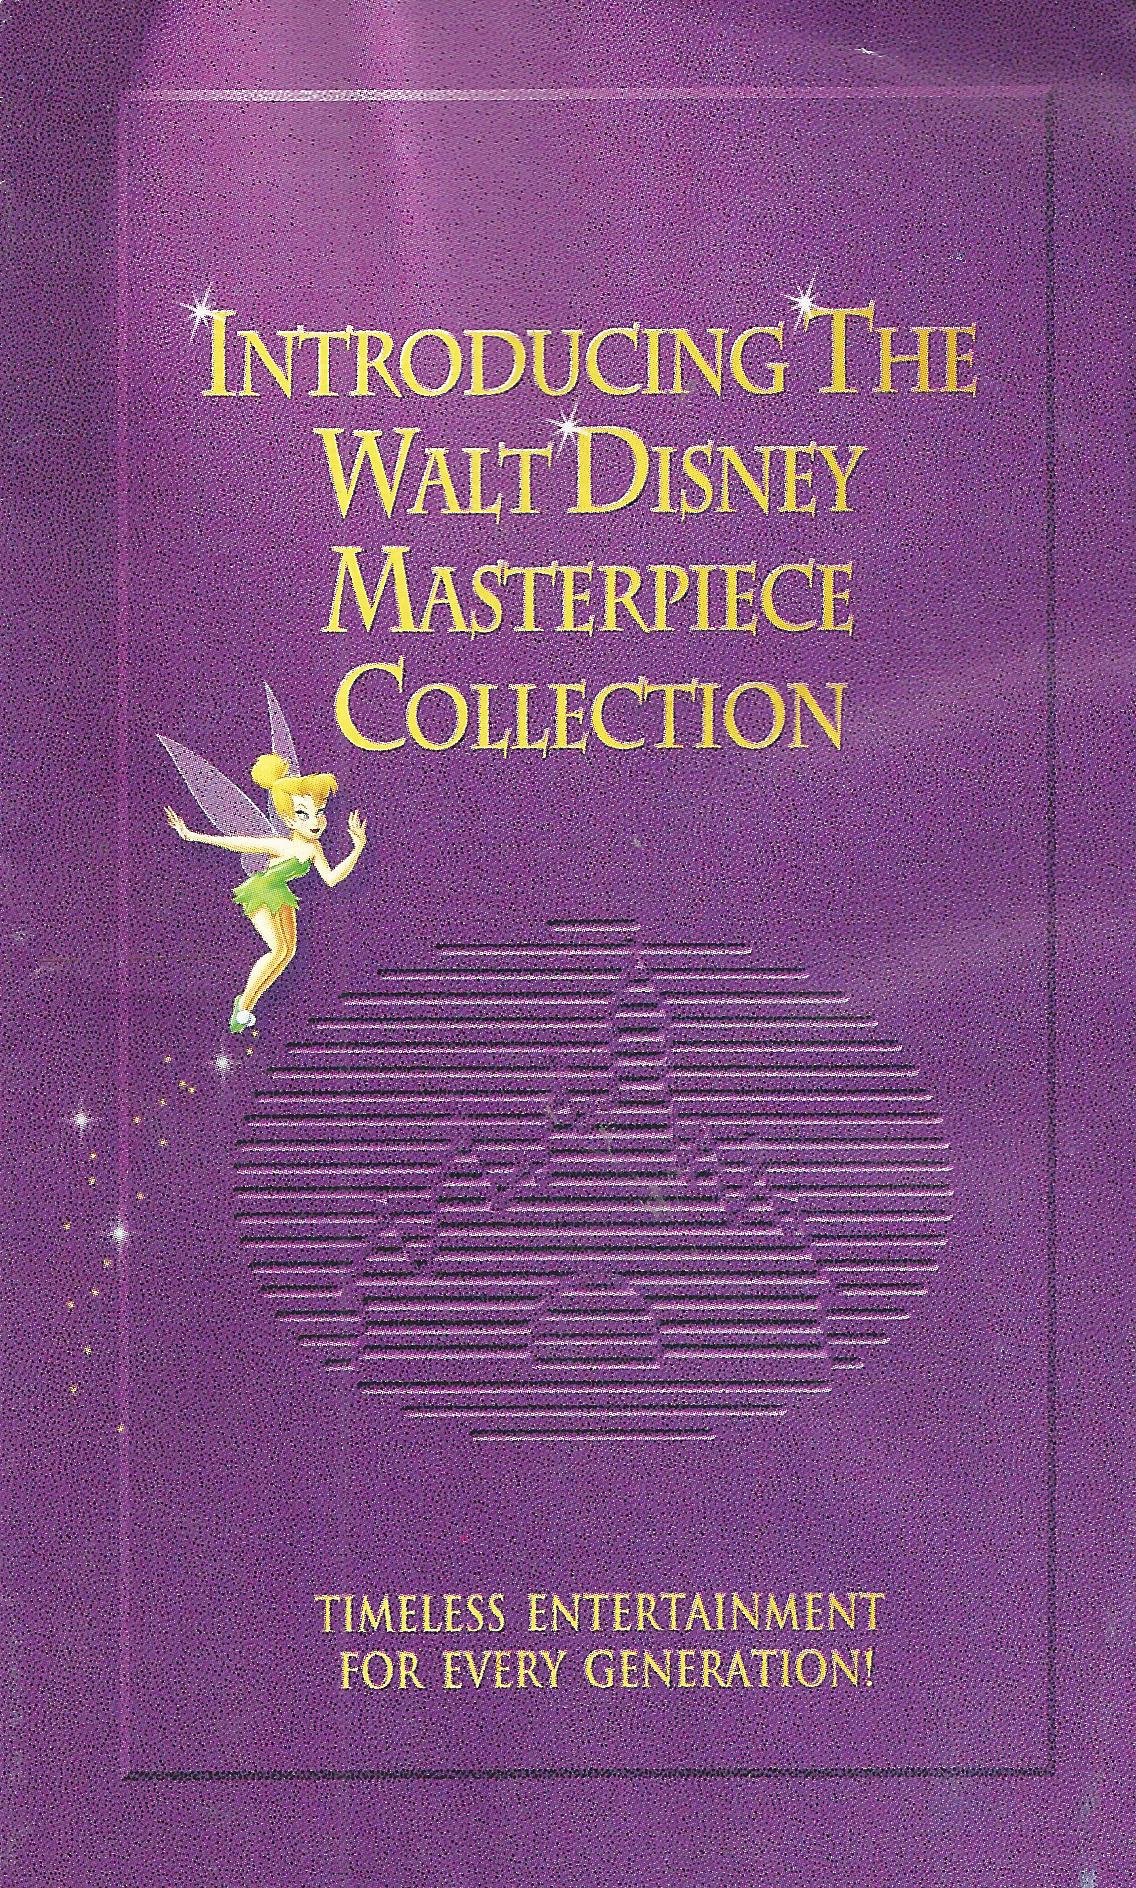 Image Walt Disney Masterpiece Collection 1995 Promotional Print Advertisment Front Cover 